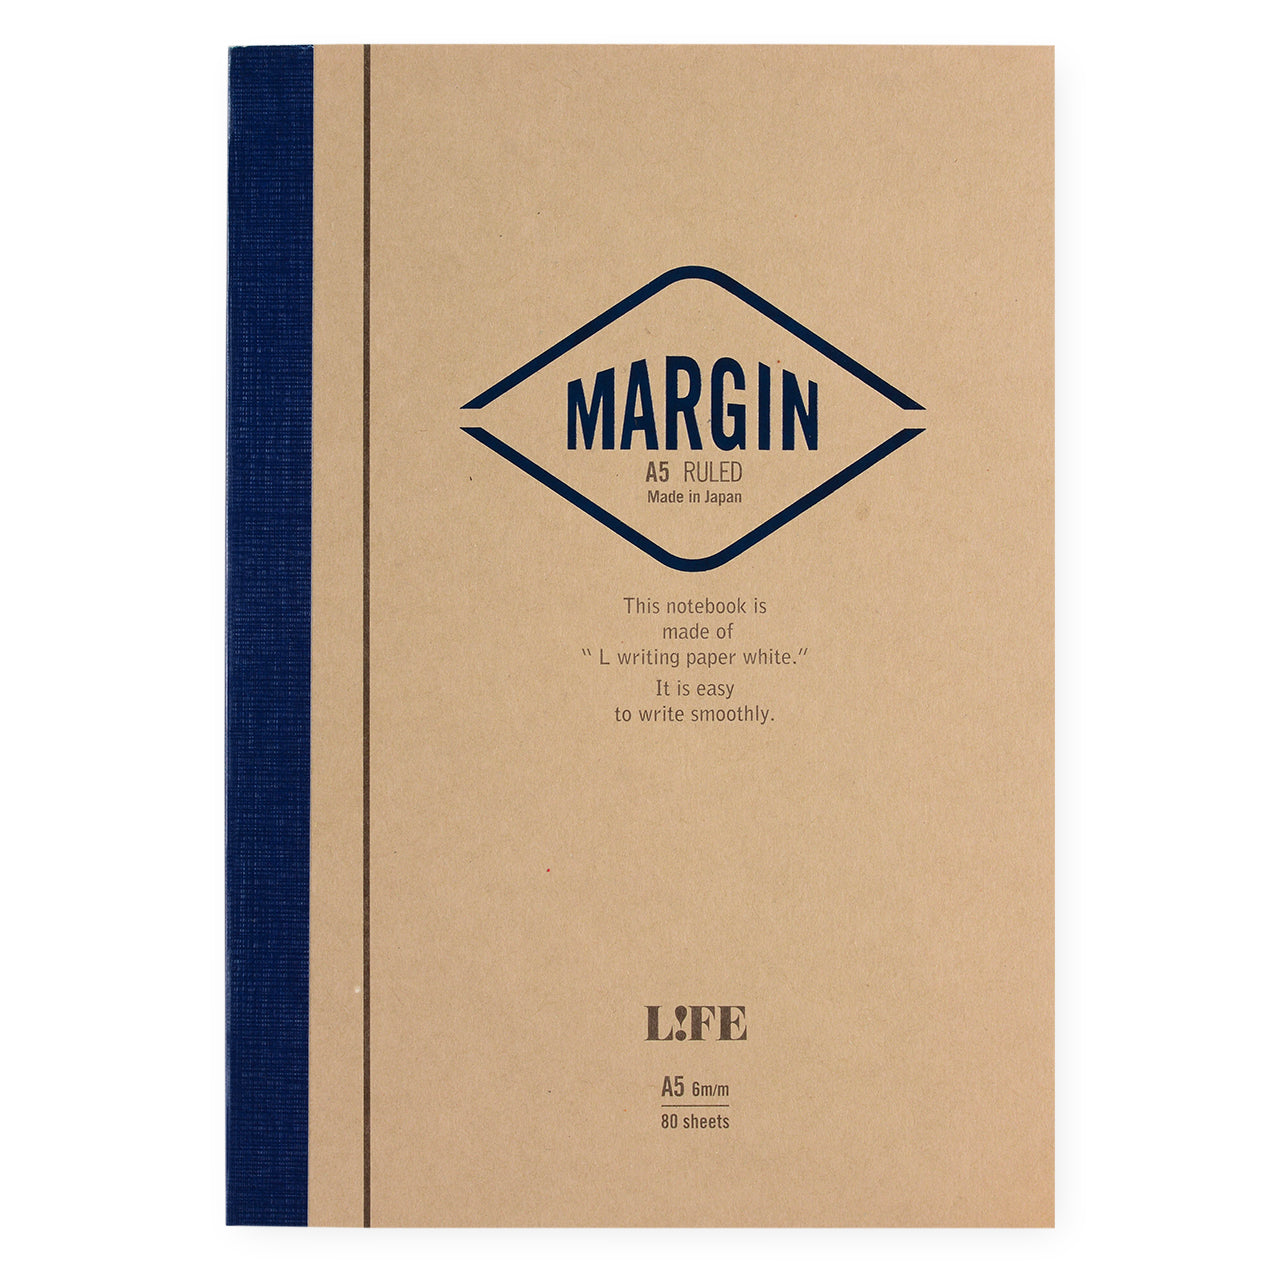 LIFE Stationery Margin A5 or B5 Notebook | Plain, Section or Ruled ruled / A5